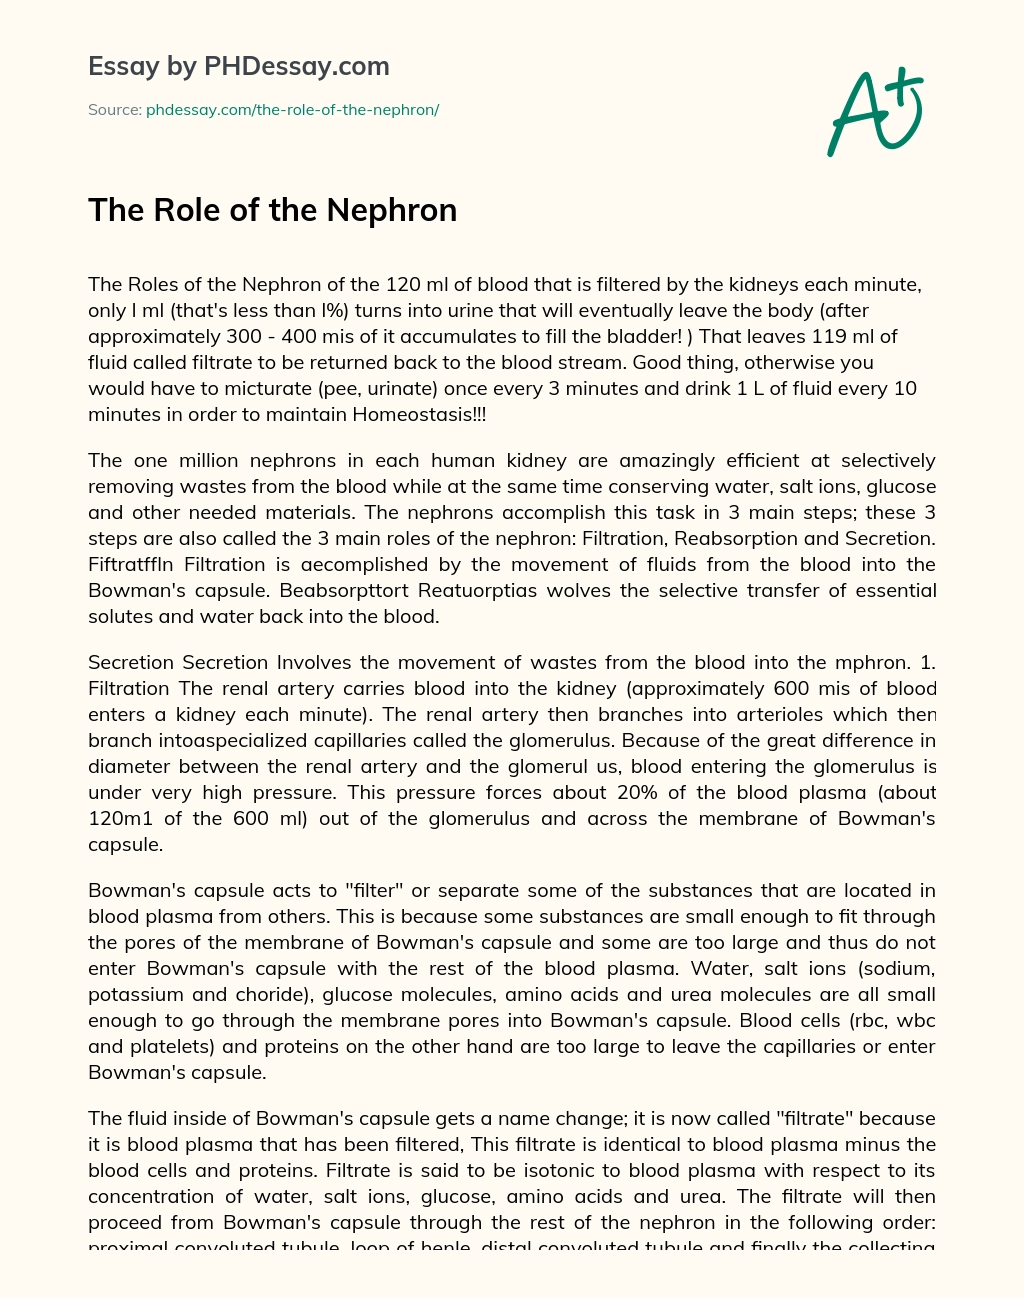 The Role of the Nephron essay